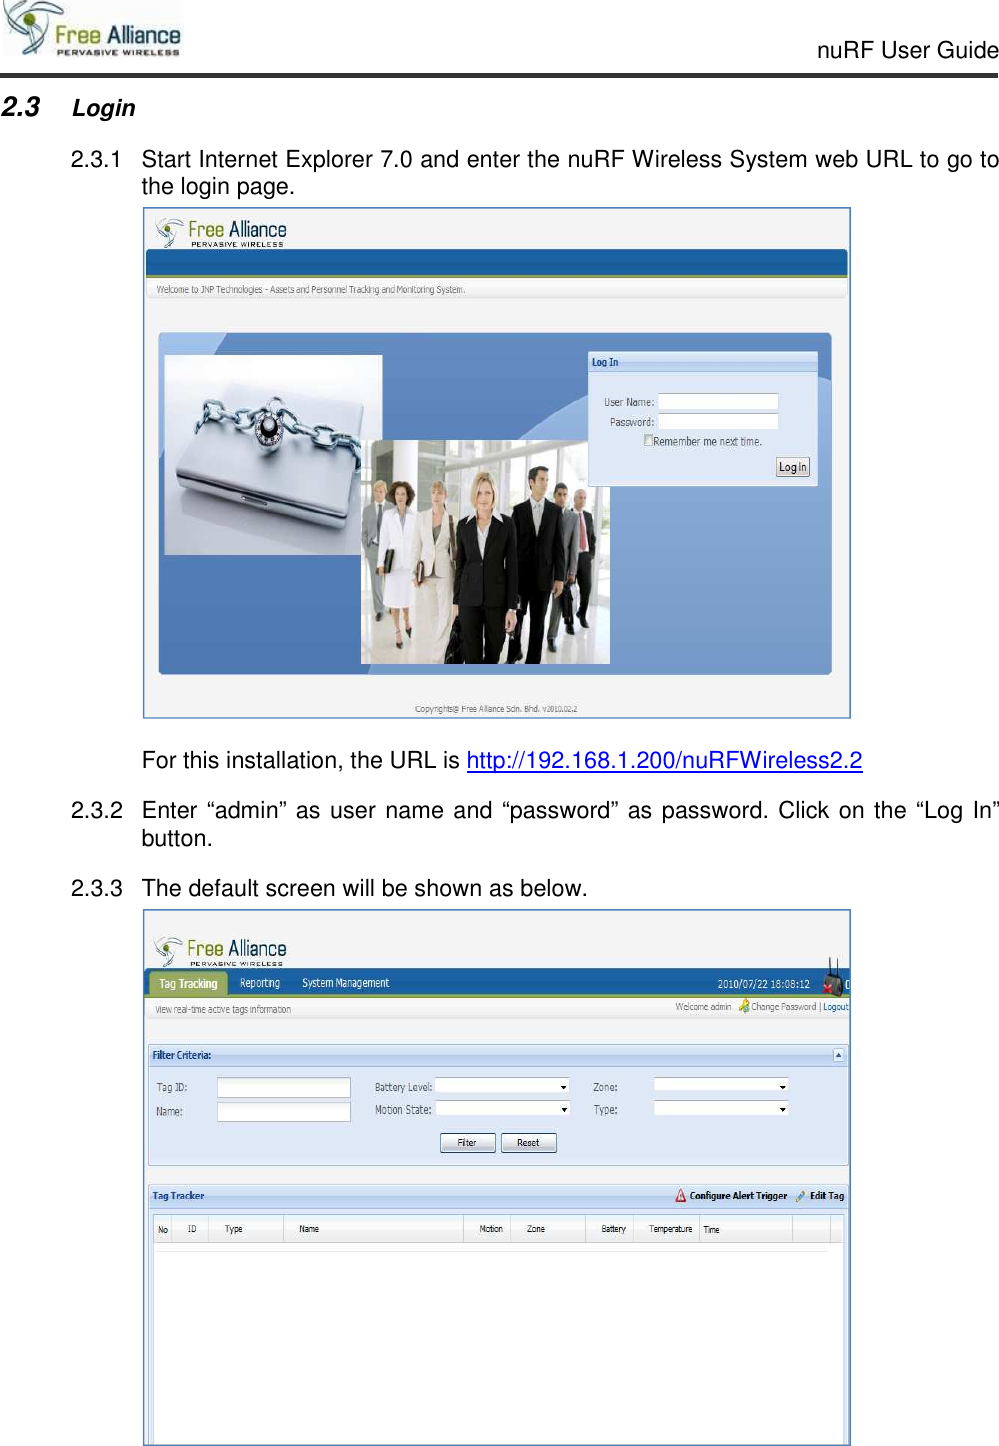     nuRF User Guide                                                                                                   2.3 Login 2.3.1  Start Internet Explorer 7.0 and enter the nuRF Wireless System web URL to go to the login page.   For this installation, the URL is http://192.168.1.200/nuRFWireless2.2 2.3.2  Enter “admin” as user name and “password” as password. Click on the “Log In” button. 2.3.3  The default screen will be shown as below.  